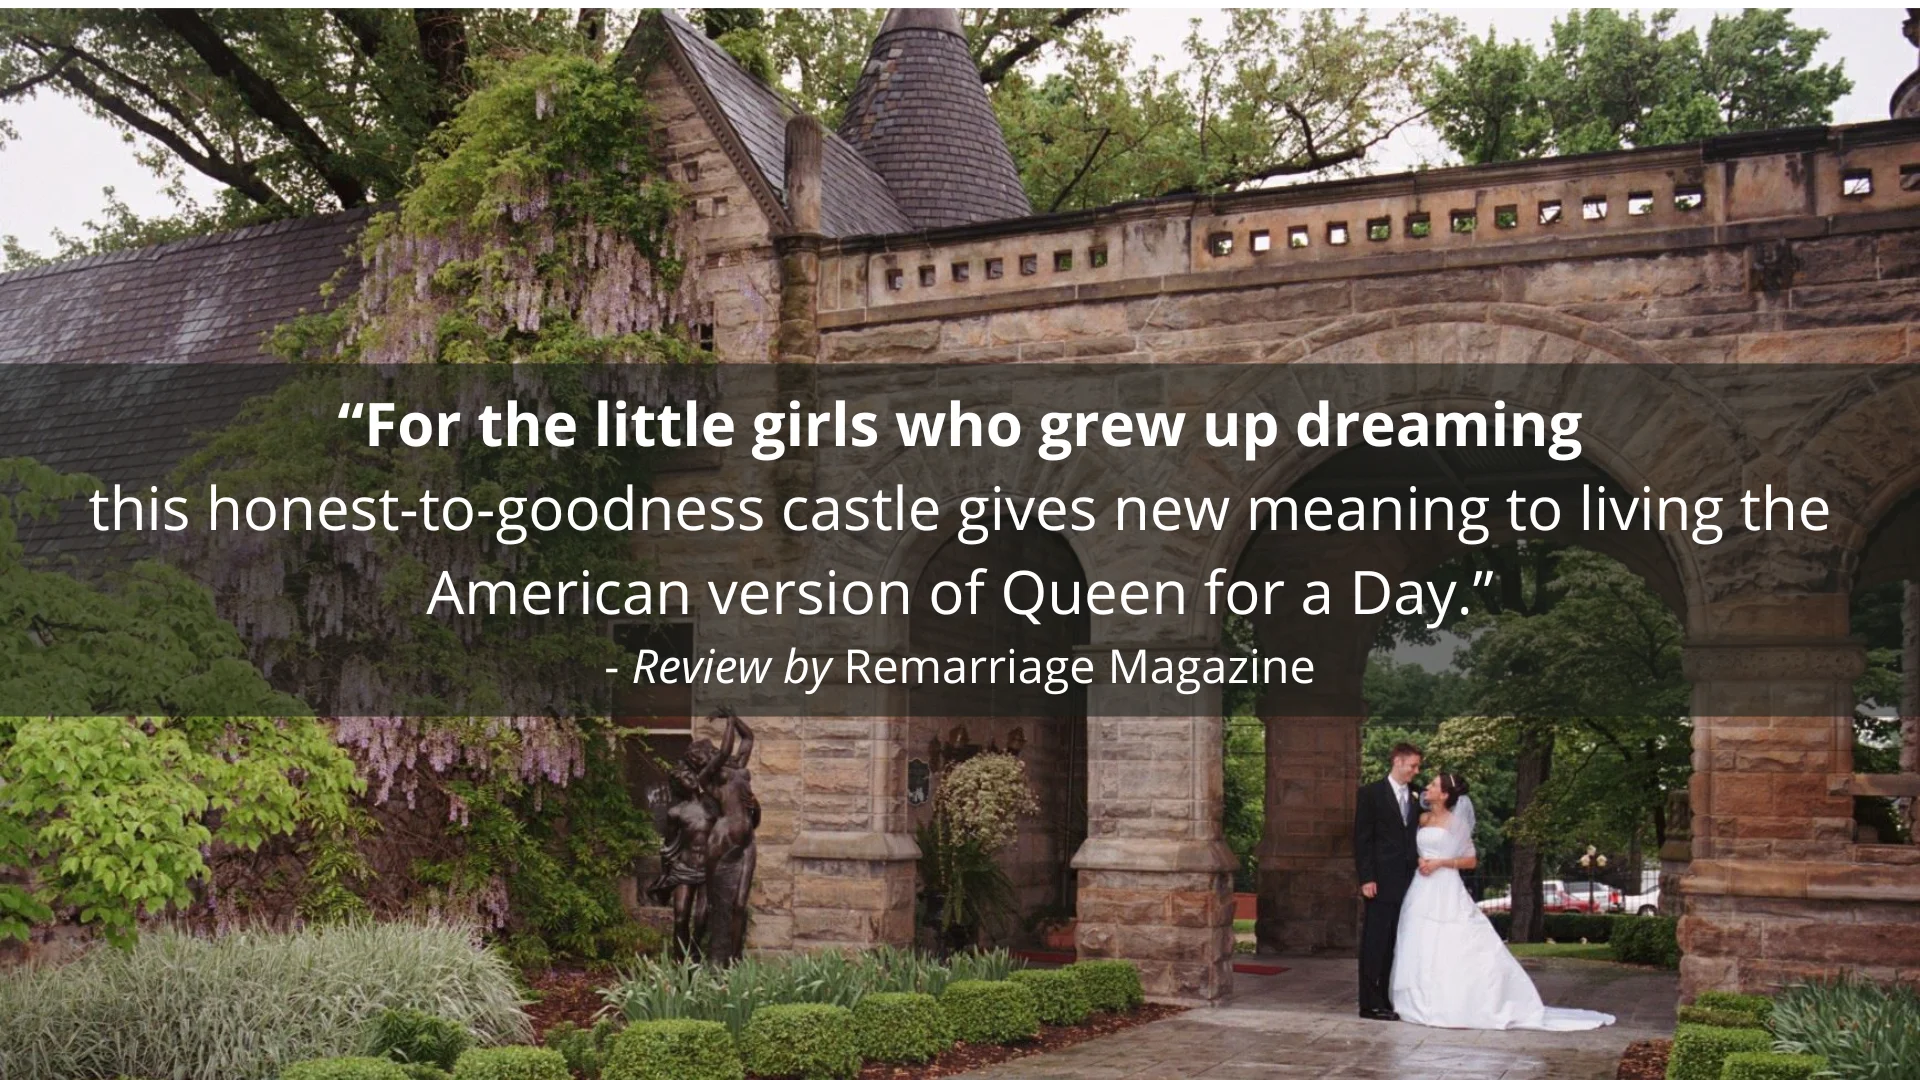 "For the little girls who grew up dreaming this honest-to-goodness castle gives new meaning to living the American version of Queen for a Day." - Review by Remarriage Magazine